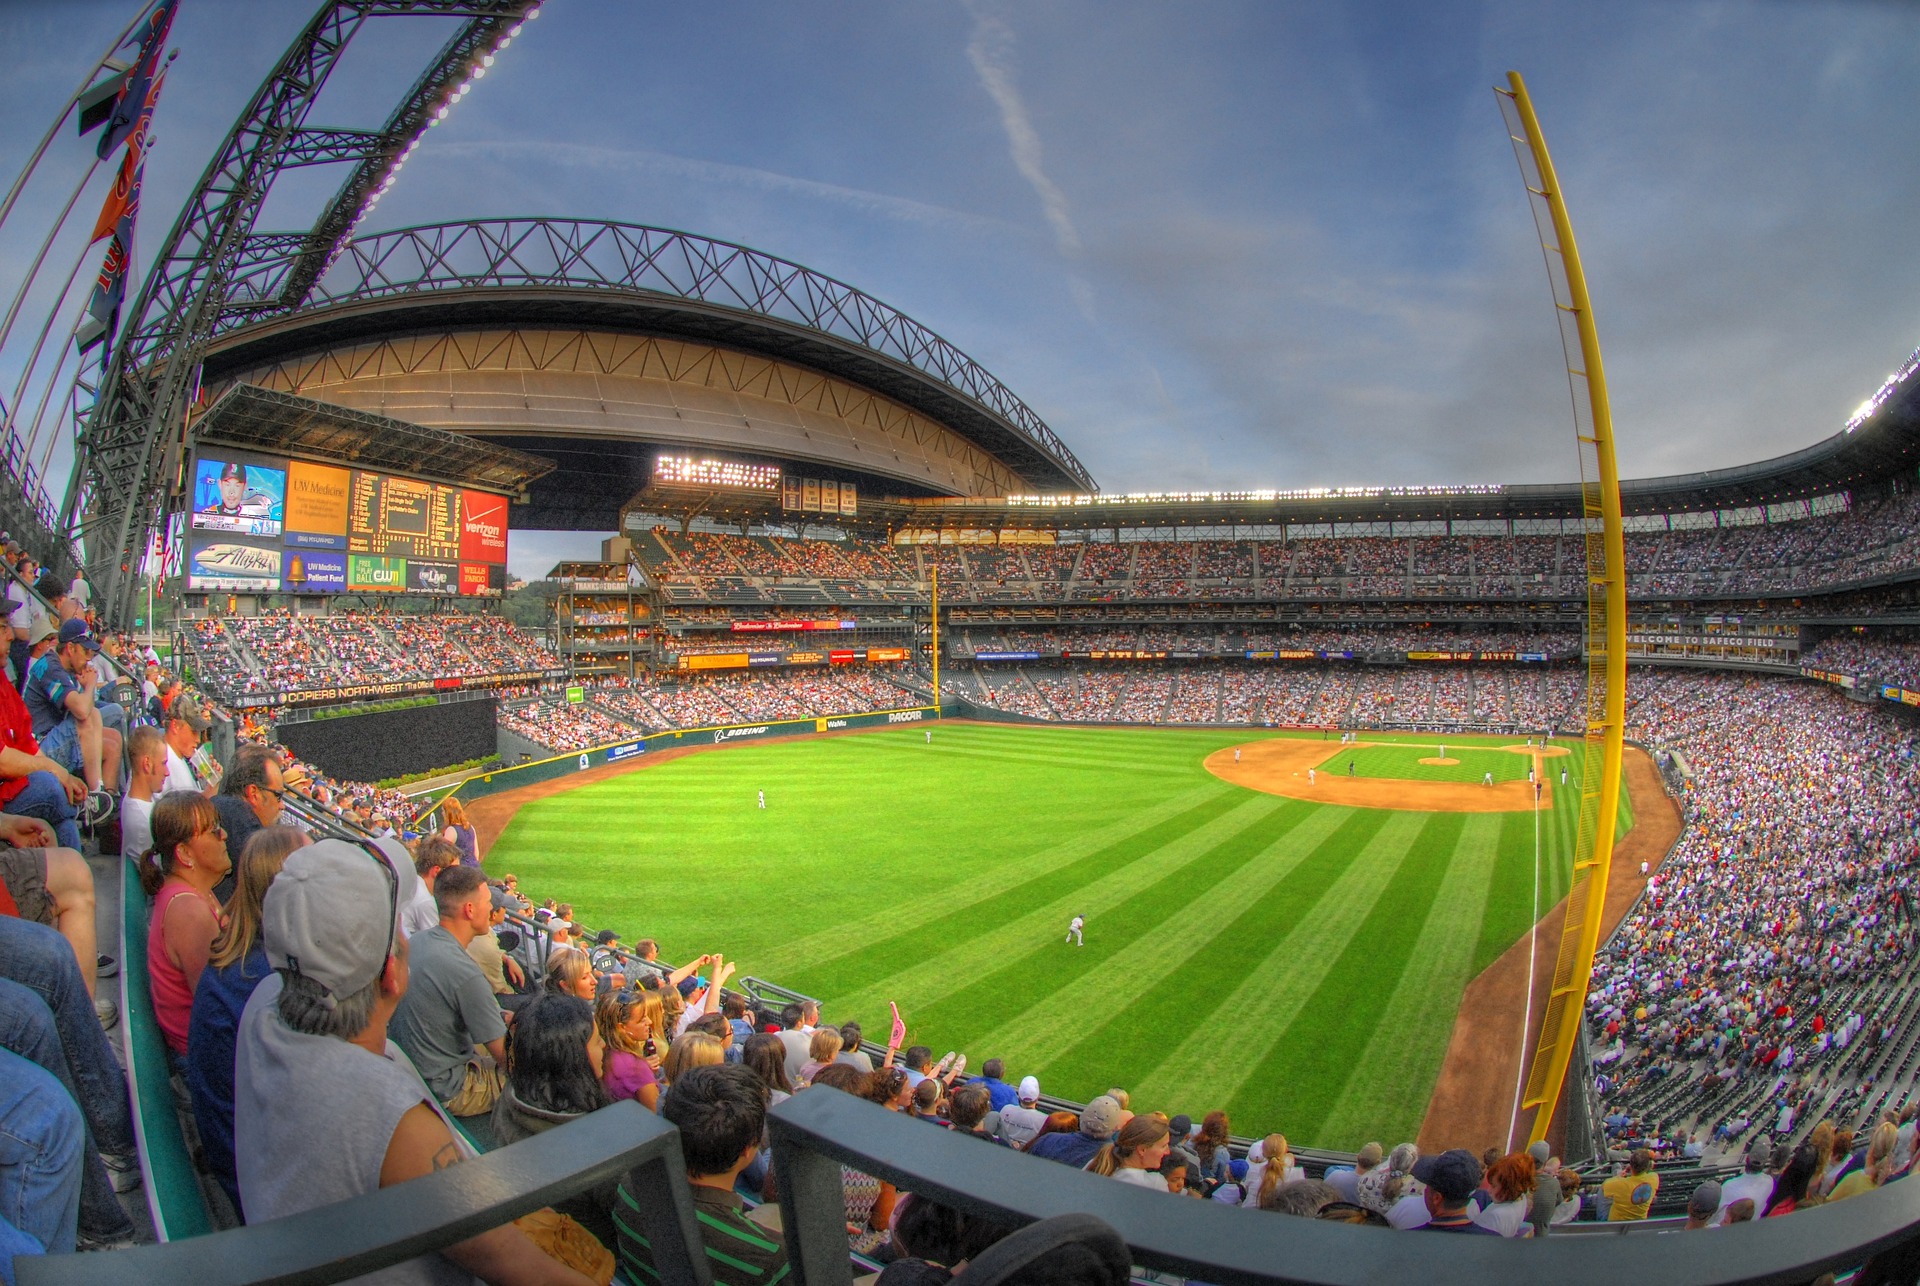 Picture of the field at T-Mobile Park, Home of the Seattle Mariners, from the bleachers. Image by Art Bromage via Pixabay.